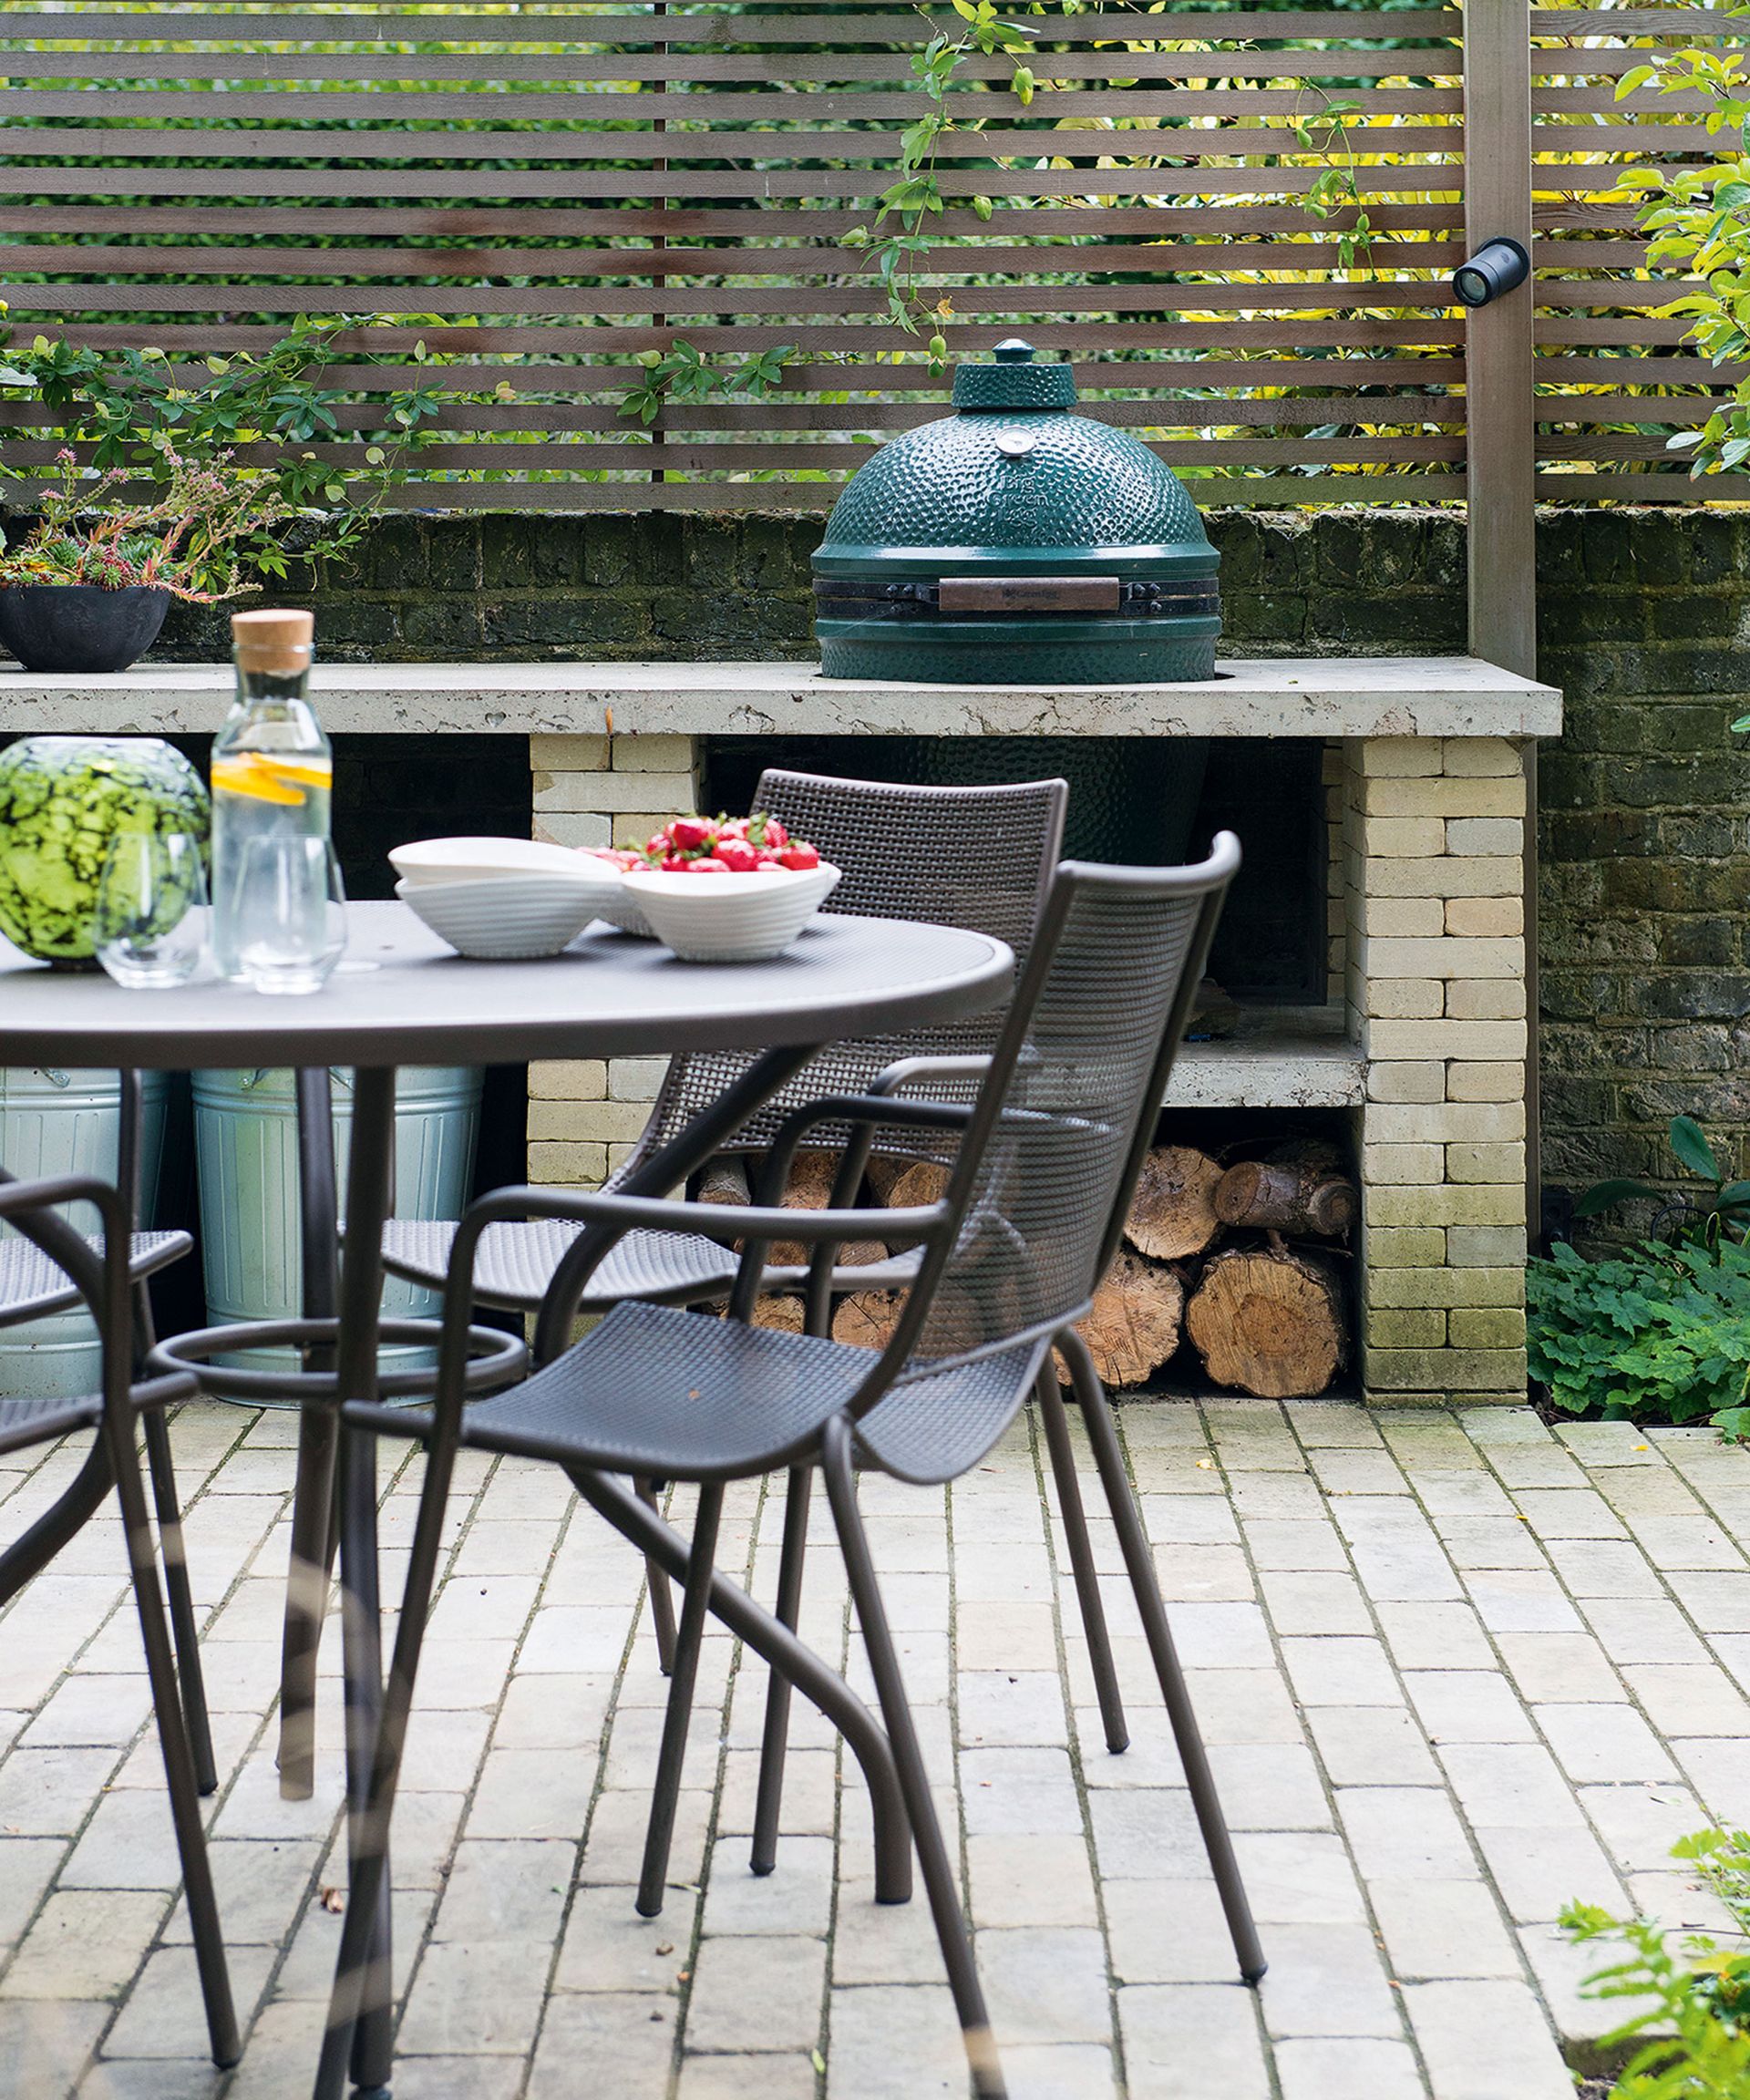 Outdoor kitchen ideas: 20 ways to make cooking in the yard easy